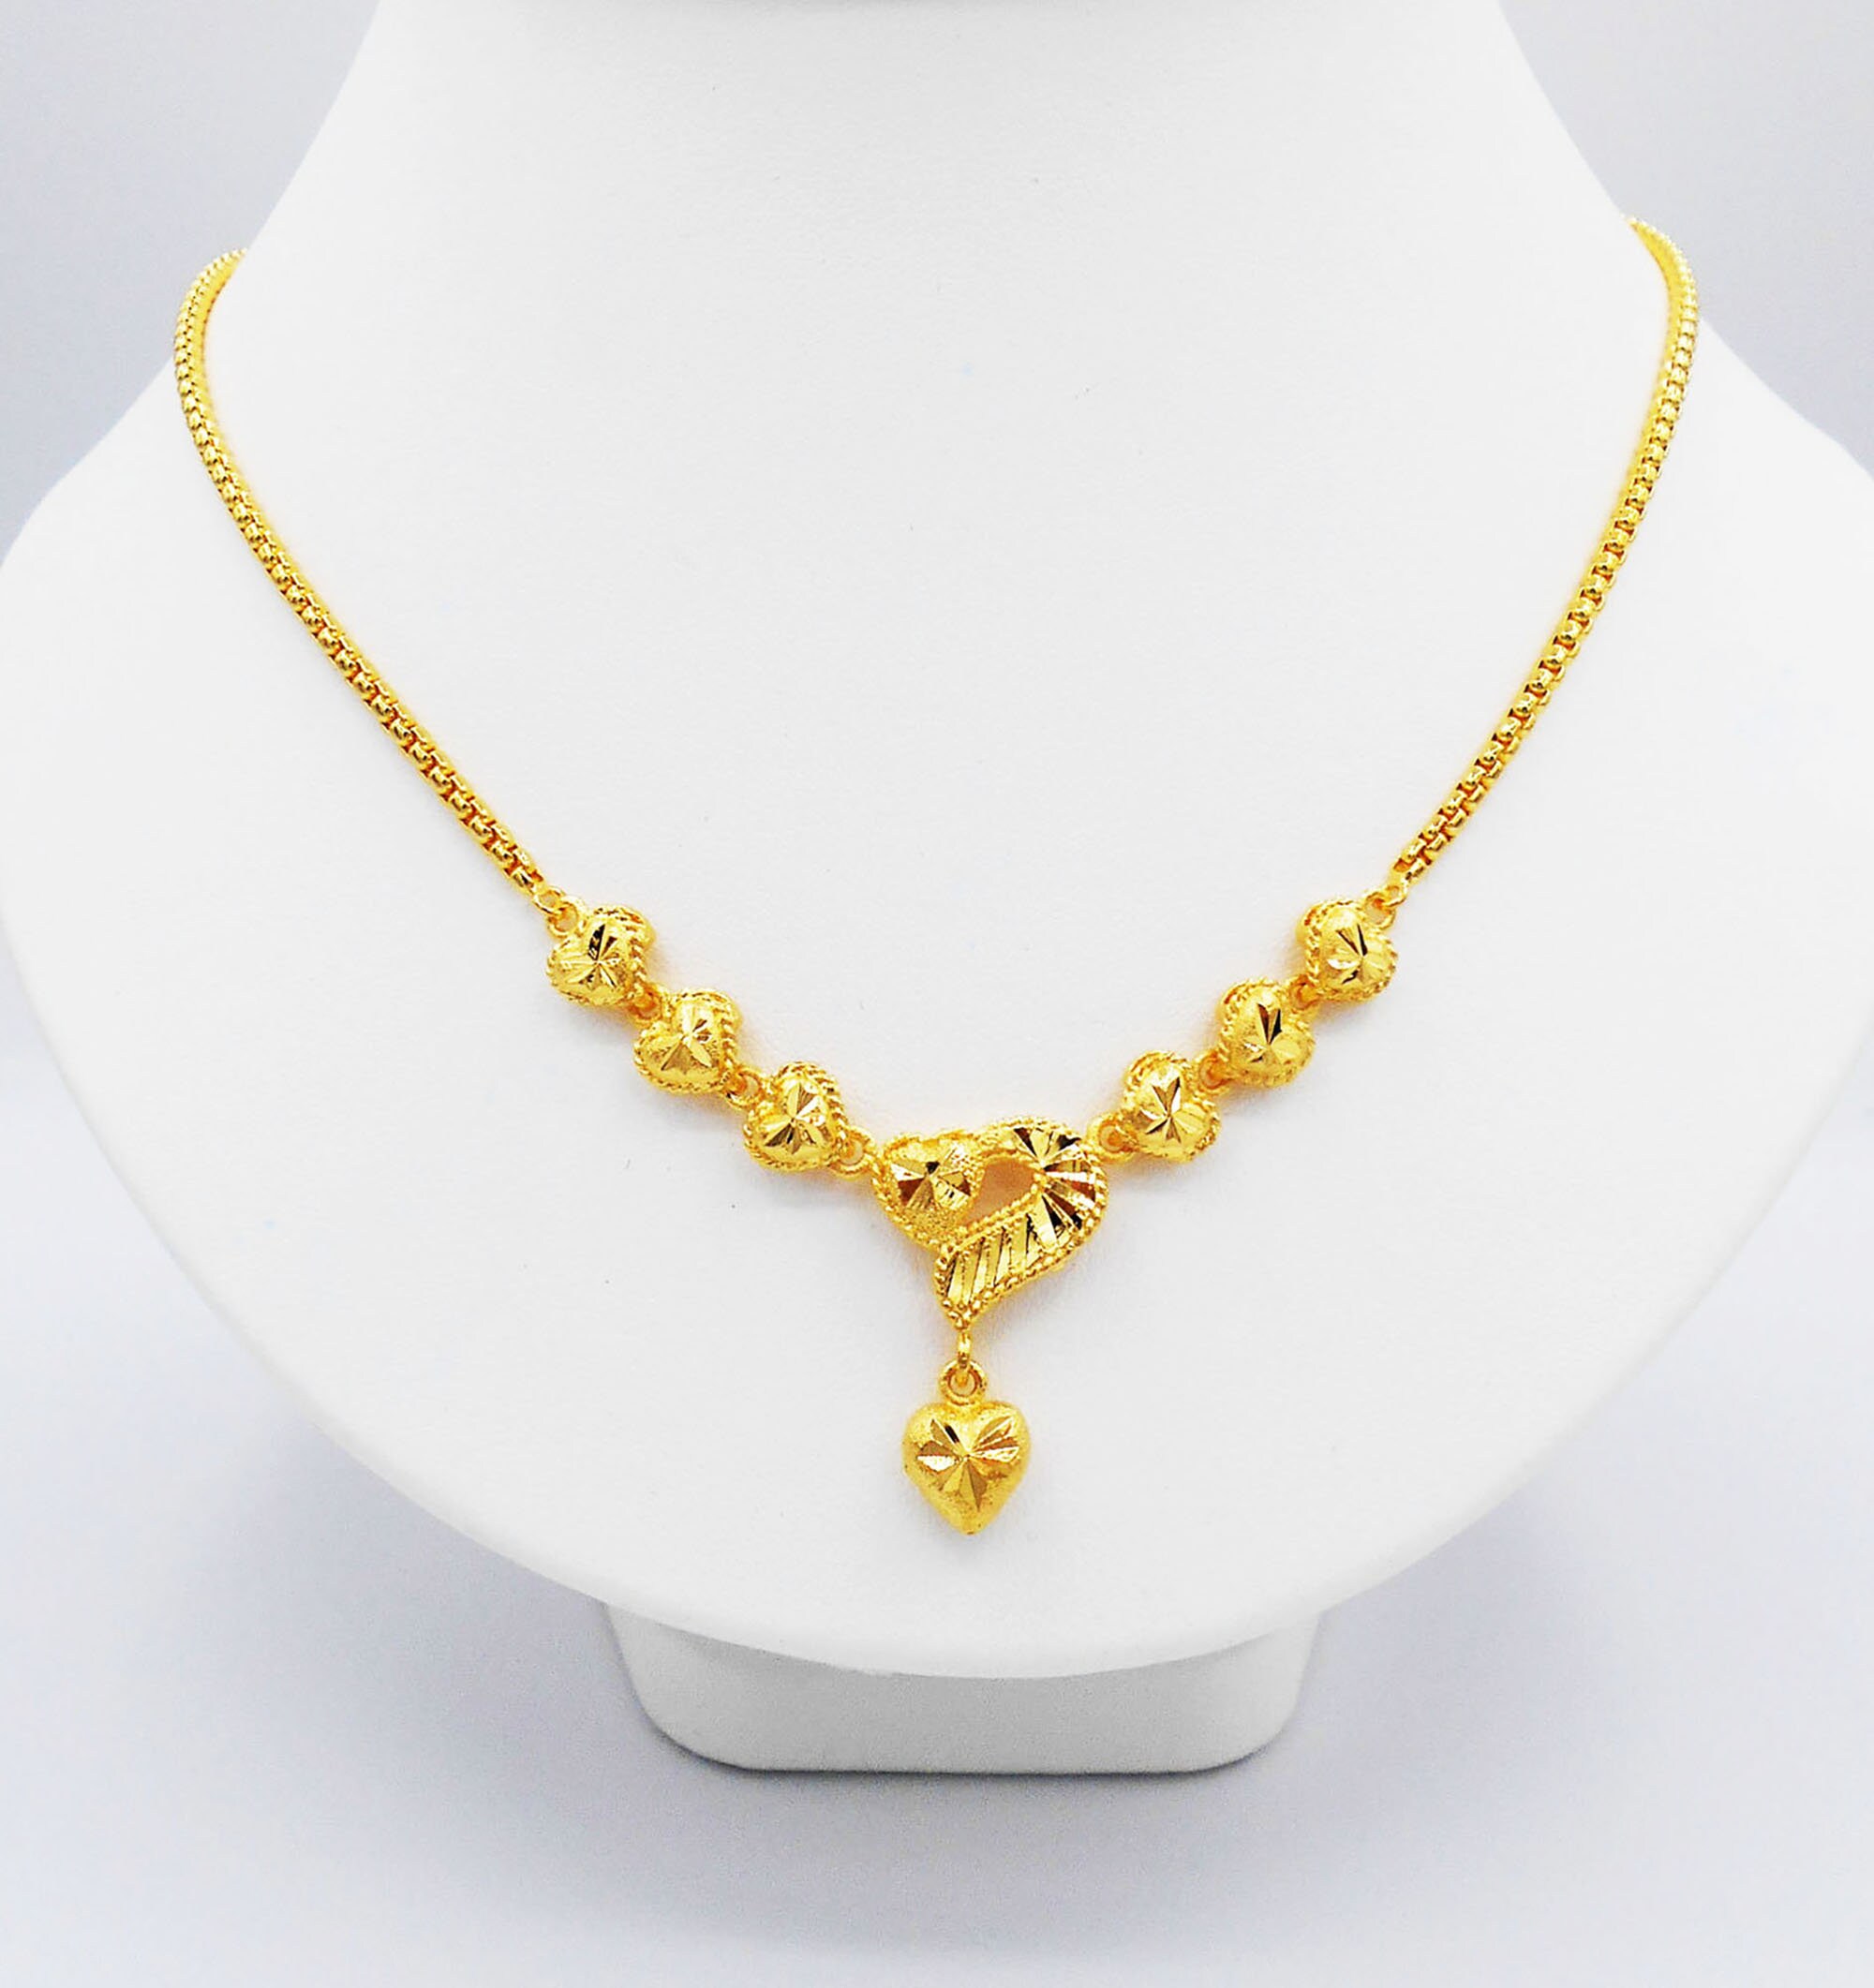 22K Yellow Gold Plated Necklace Chain Pendant Charm Choker Flower 17 Inches 